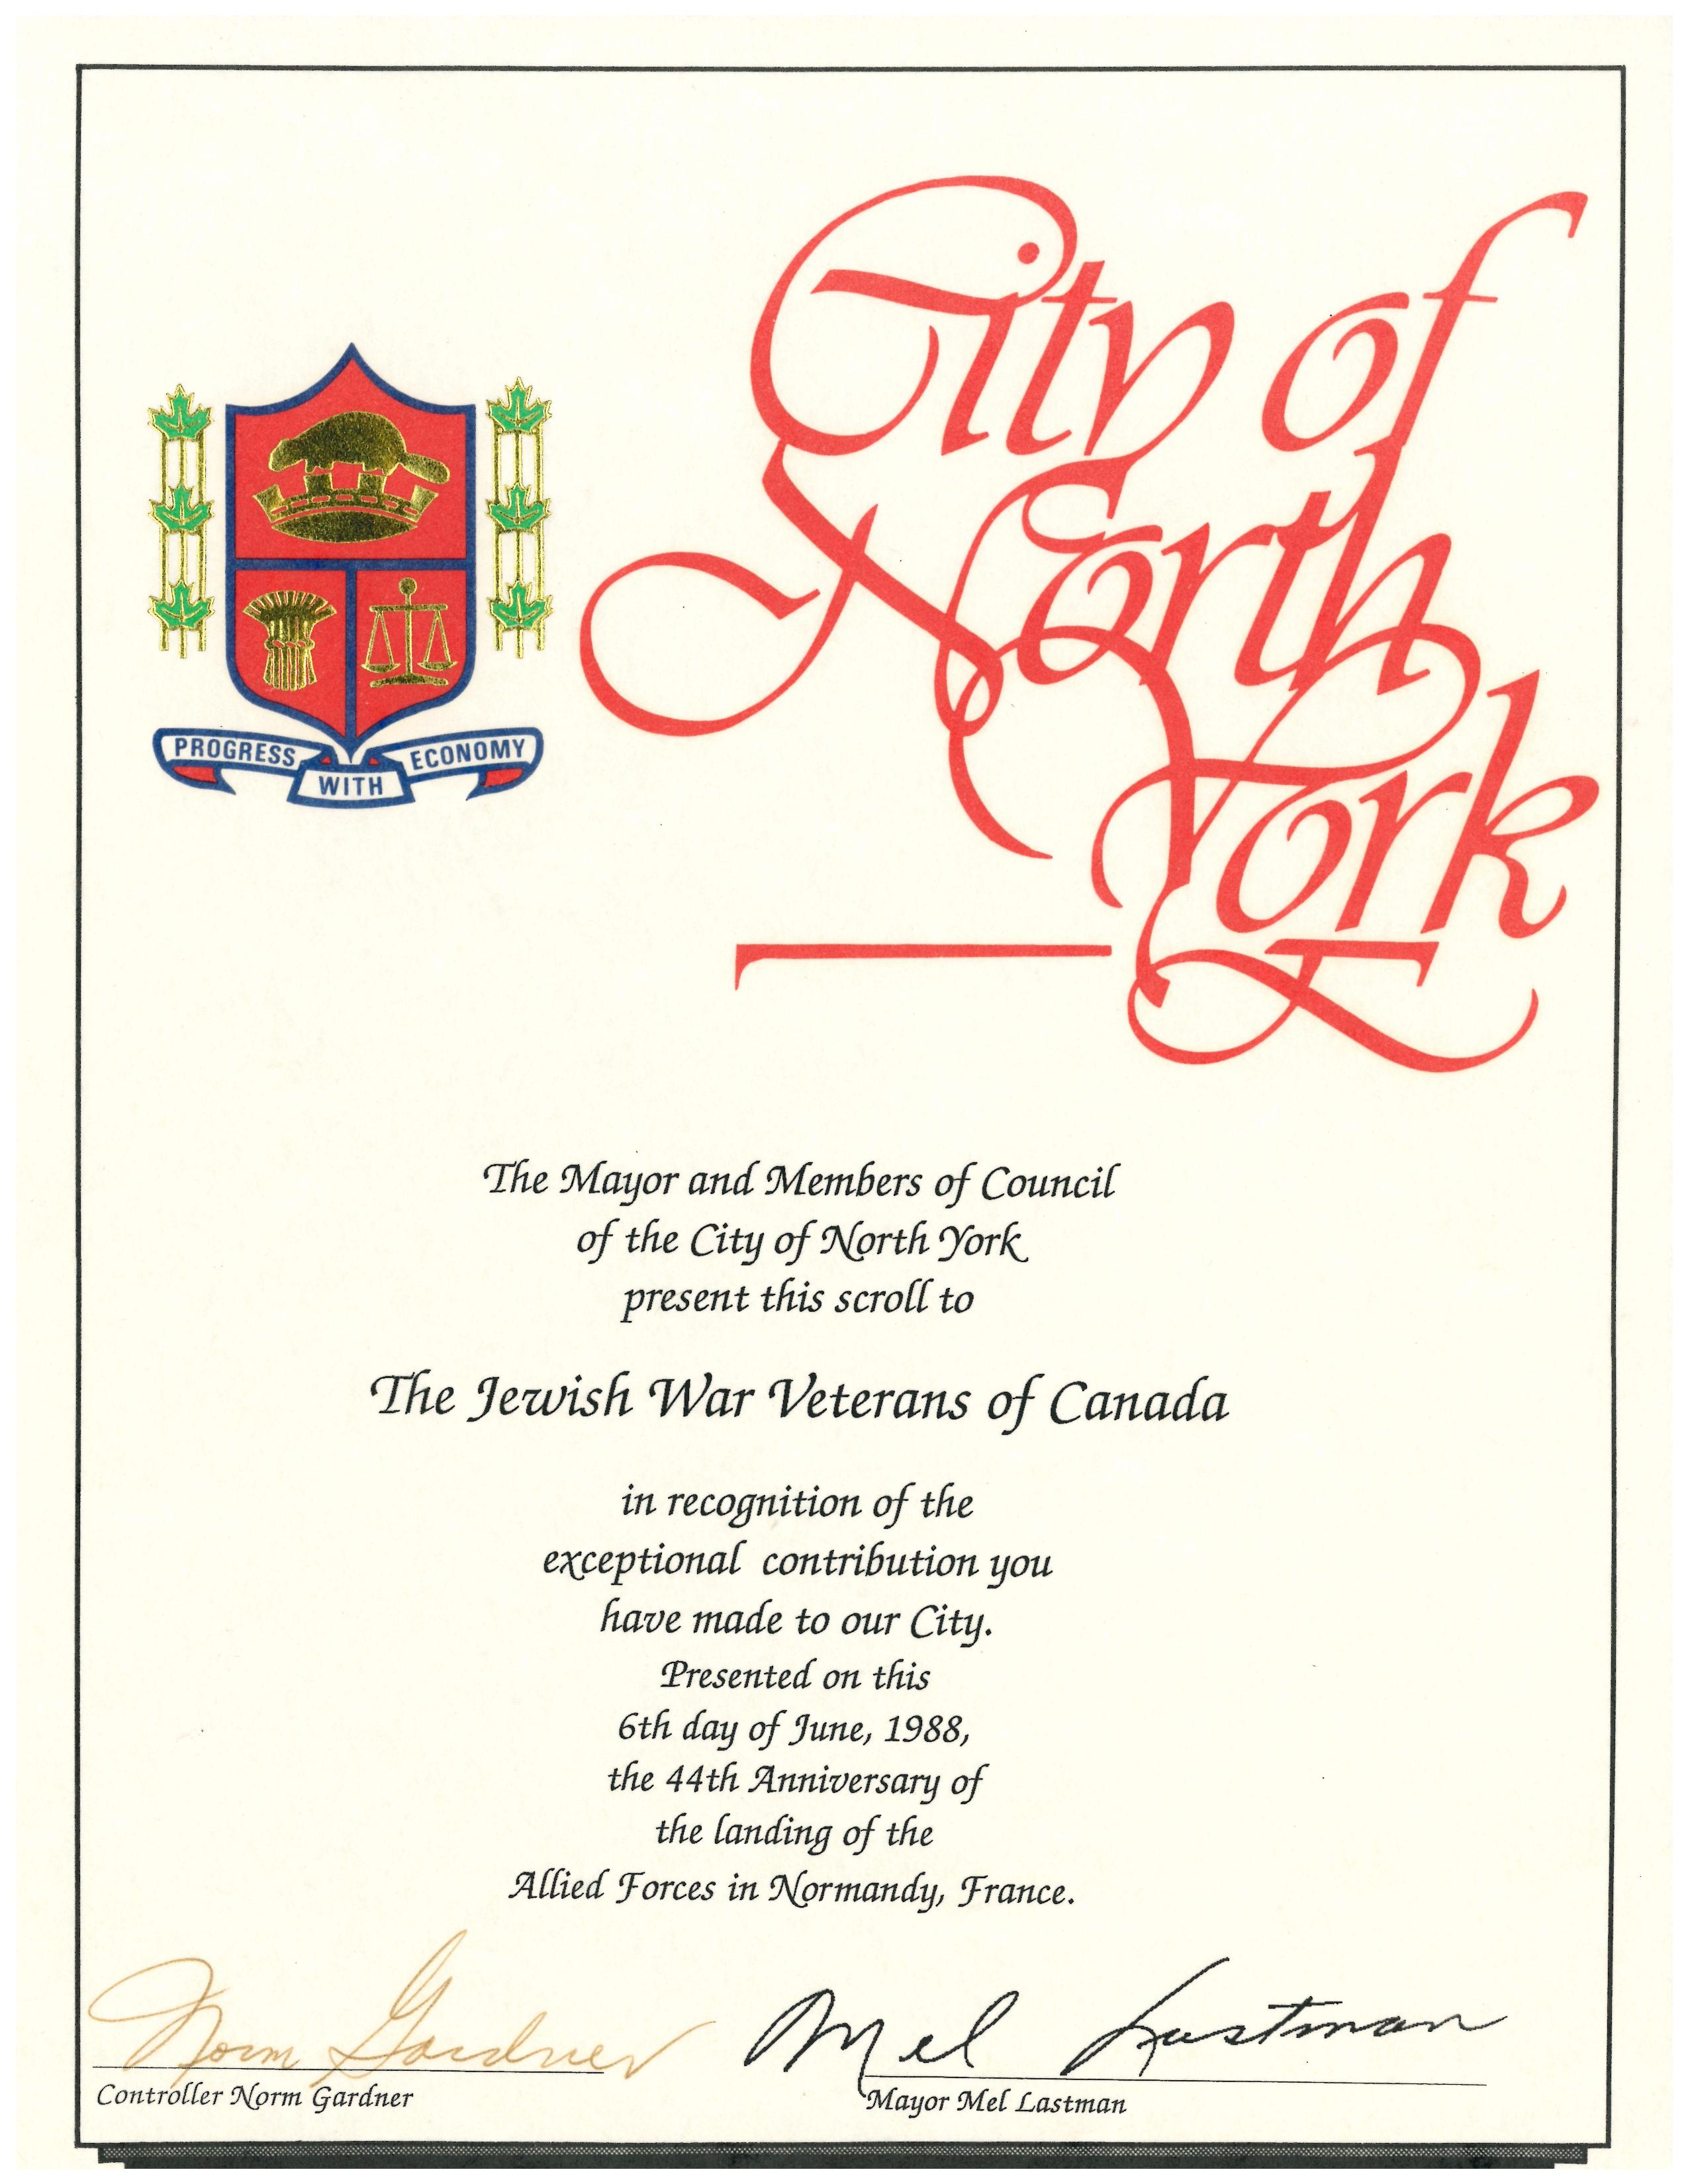 City of North York scroll issued to the Jewish War Veterans of Canada